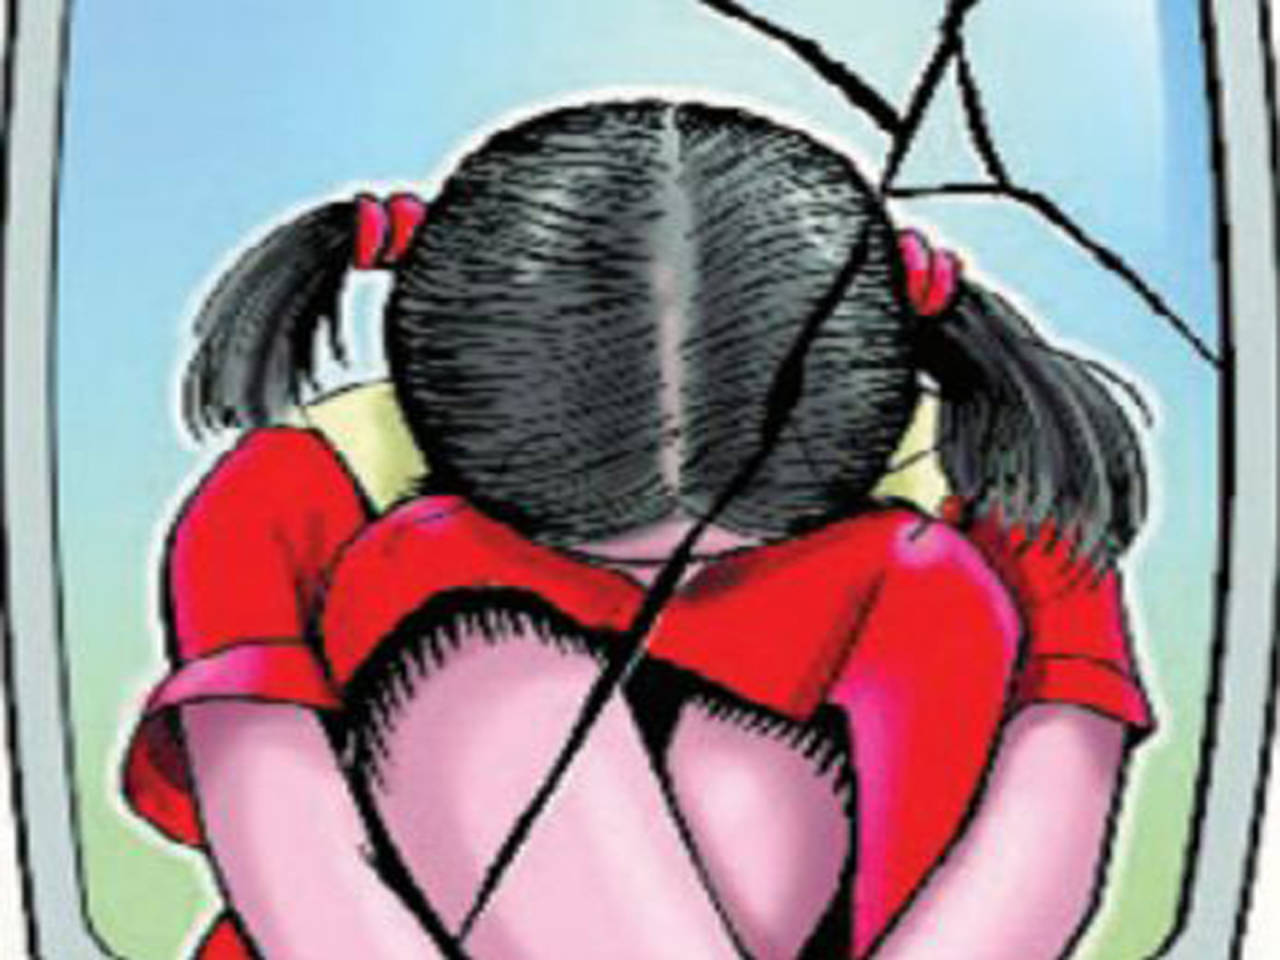 Student Girl - Teacher arrested for showing students porn | Coimbatore News - Times of  India